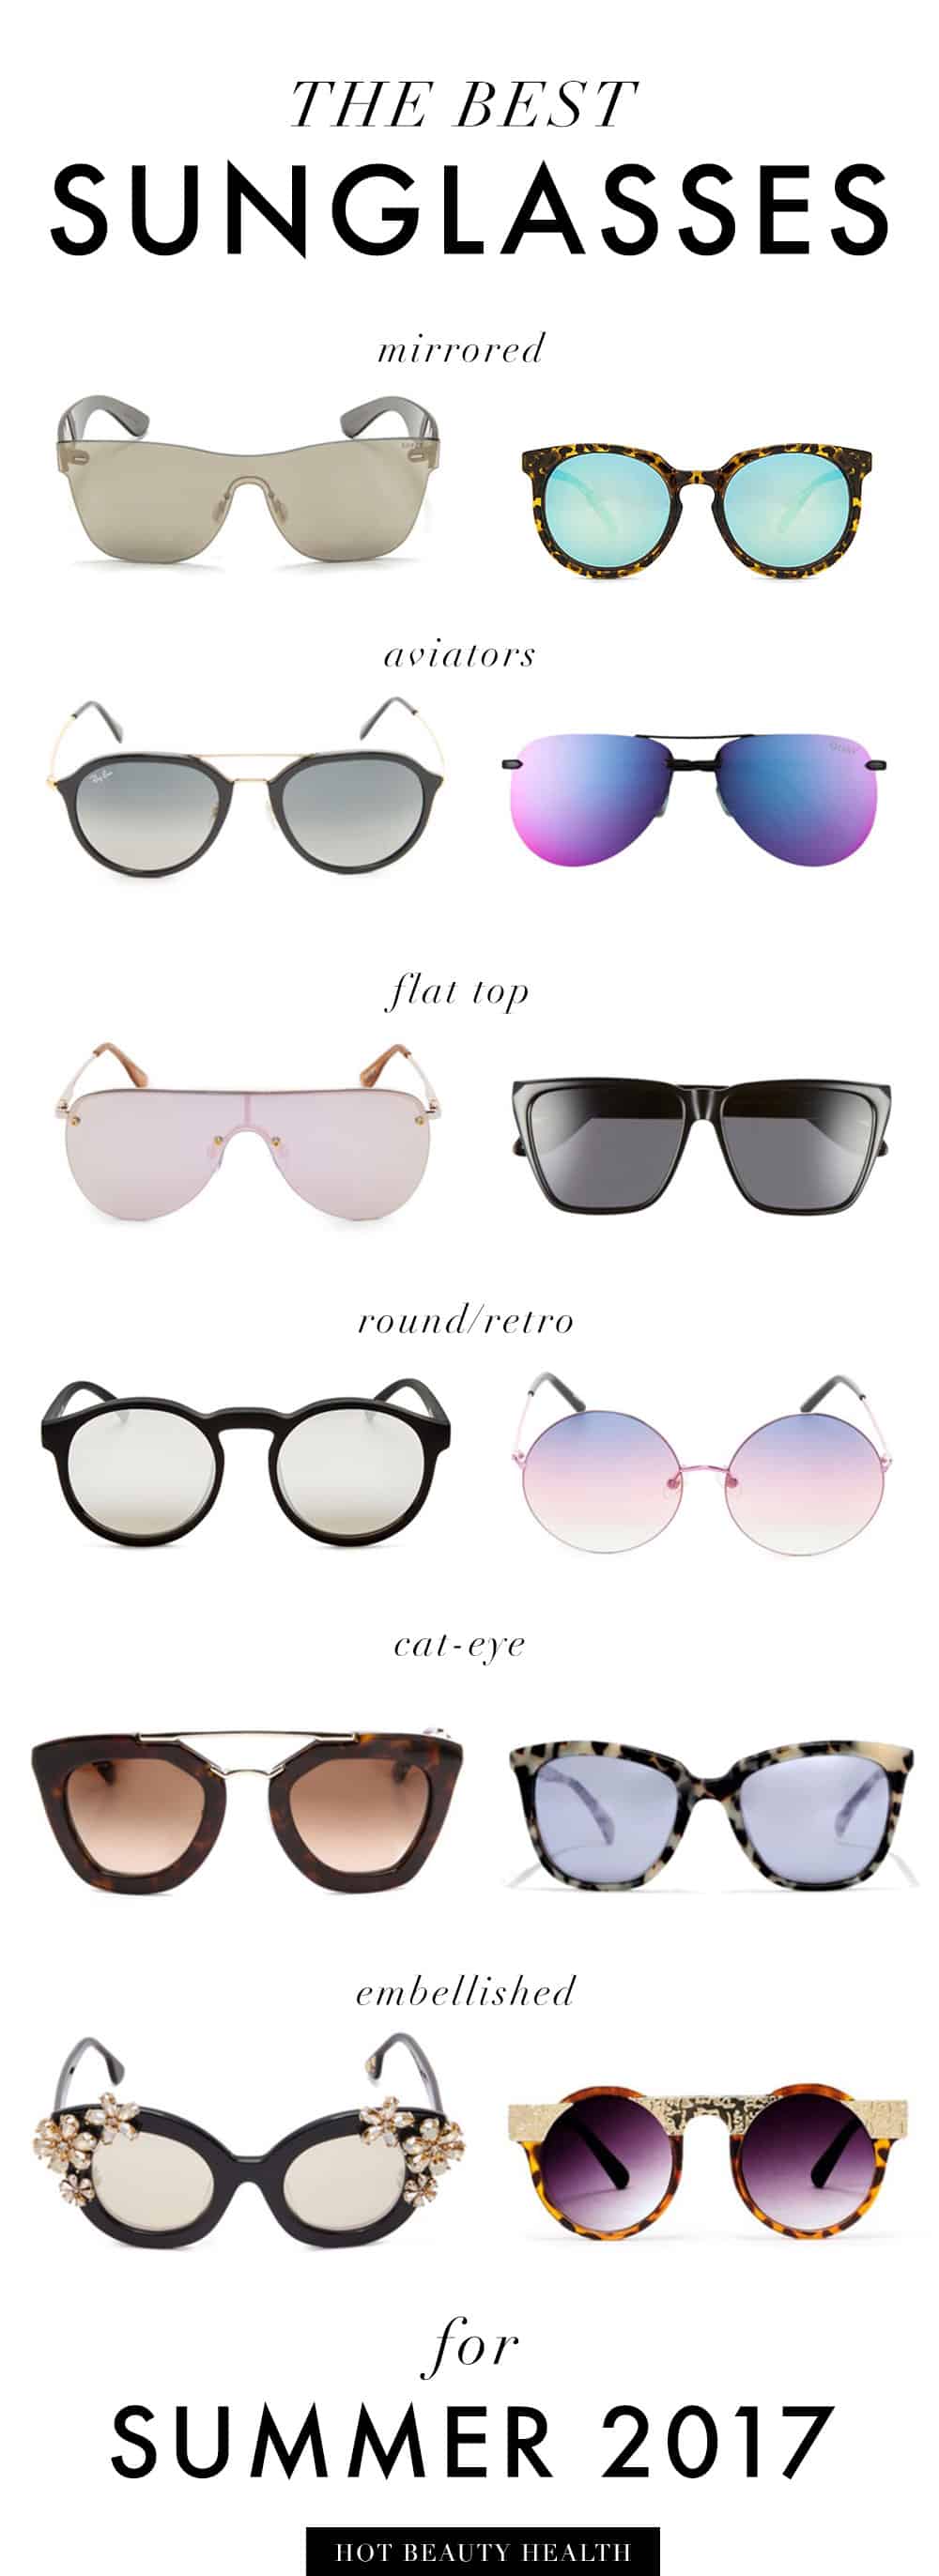 The Ultimate Women's Summer Sunglasses Guide for 2017! Find cute sunglasses to wear at the beach or to accessorize your outfits. So many different frames to choose (aviators, round/retro, cat eye, etc.) from brands like Ray Ban and Quay Australia.